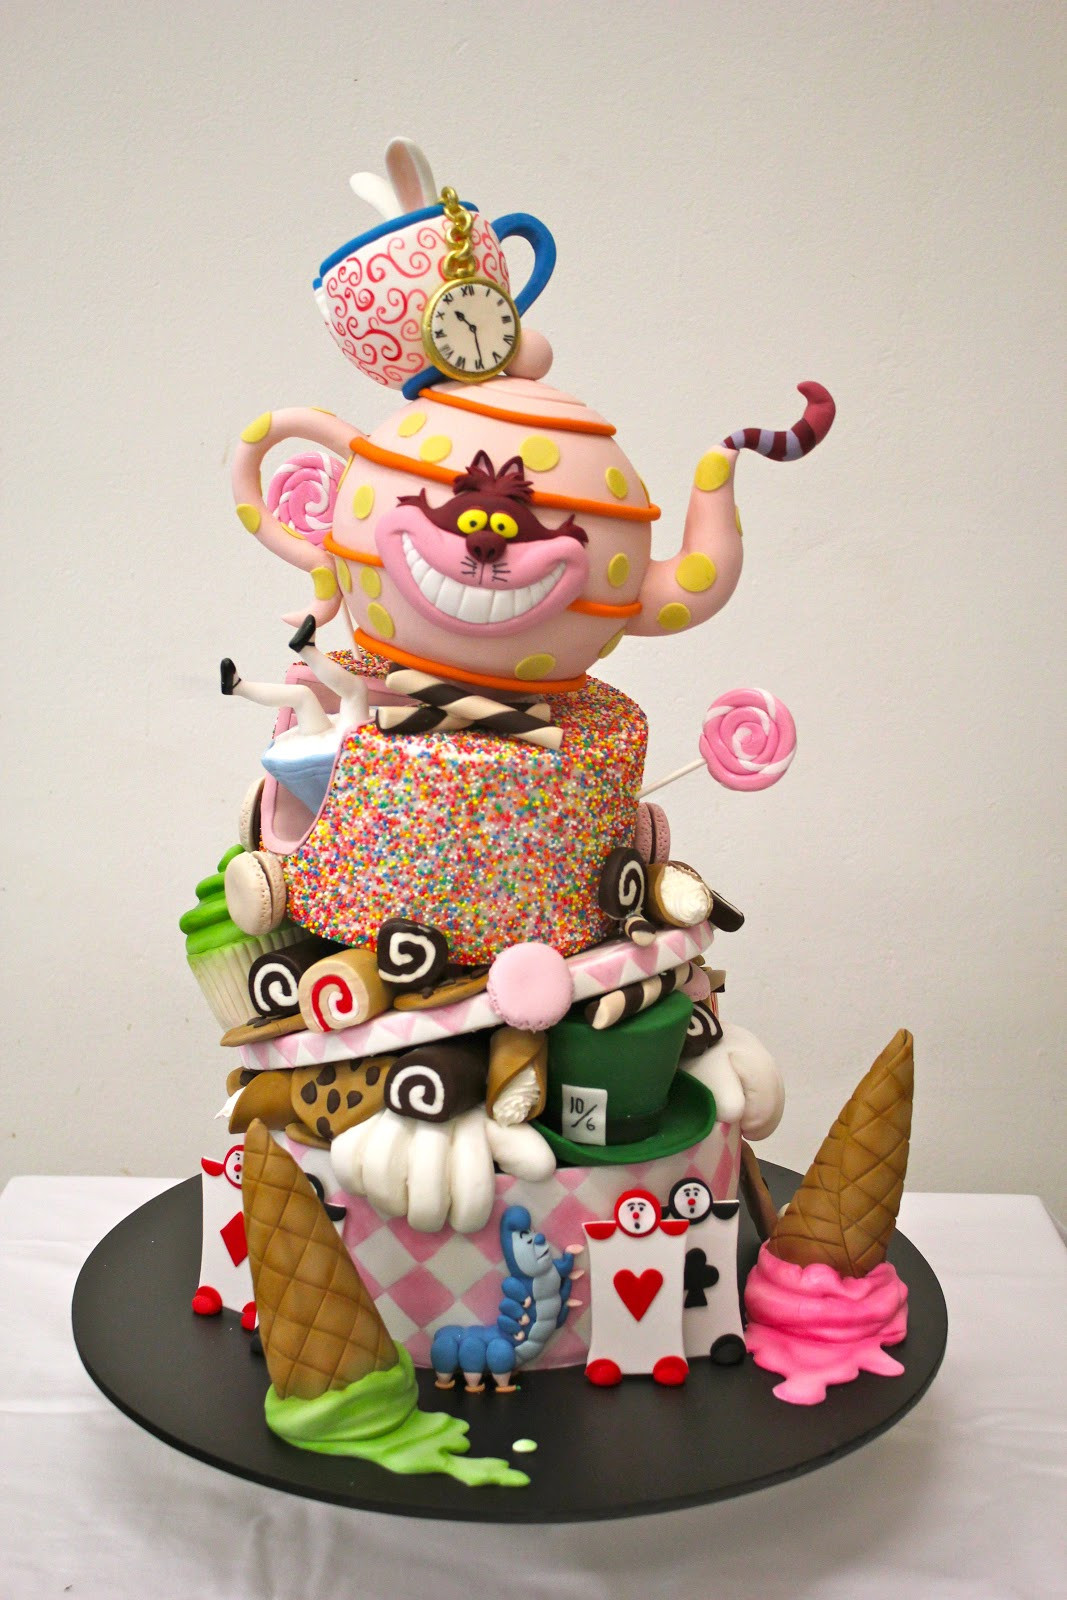 Mad Hatter Wedding Cakes
 10 Mad Hatter Themed Cakes Alice in Wonderland Mad